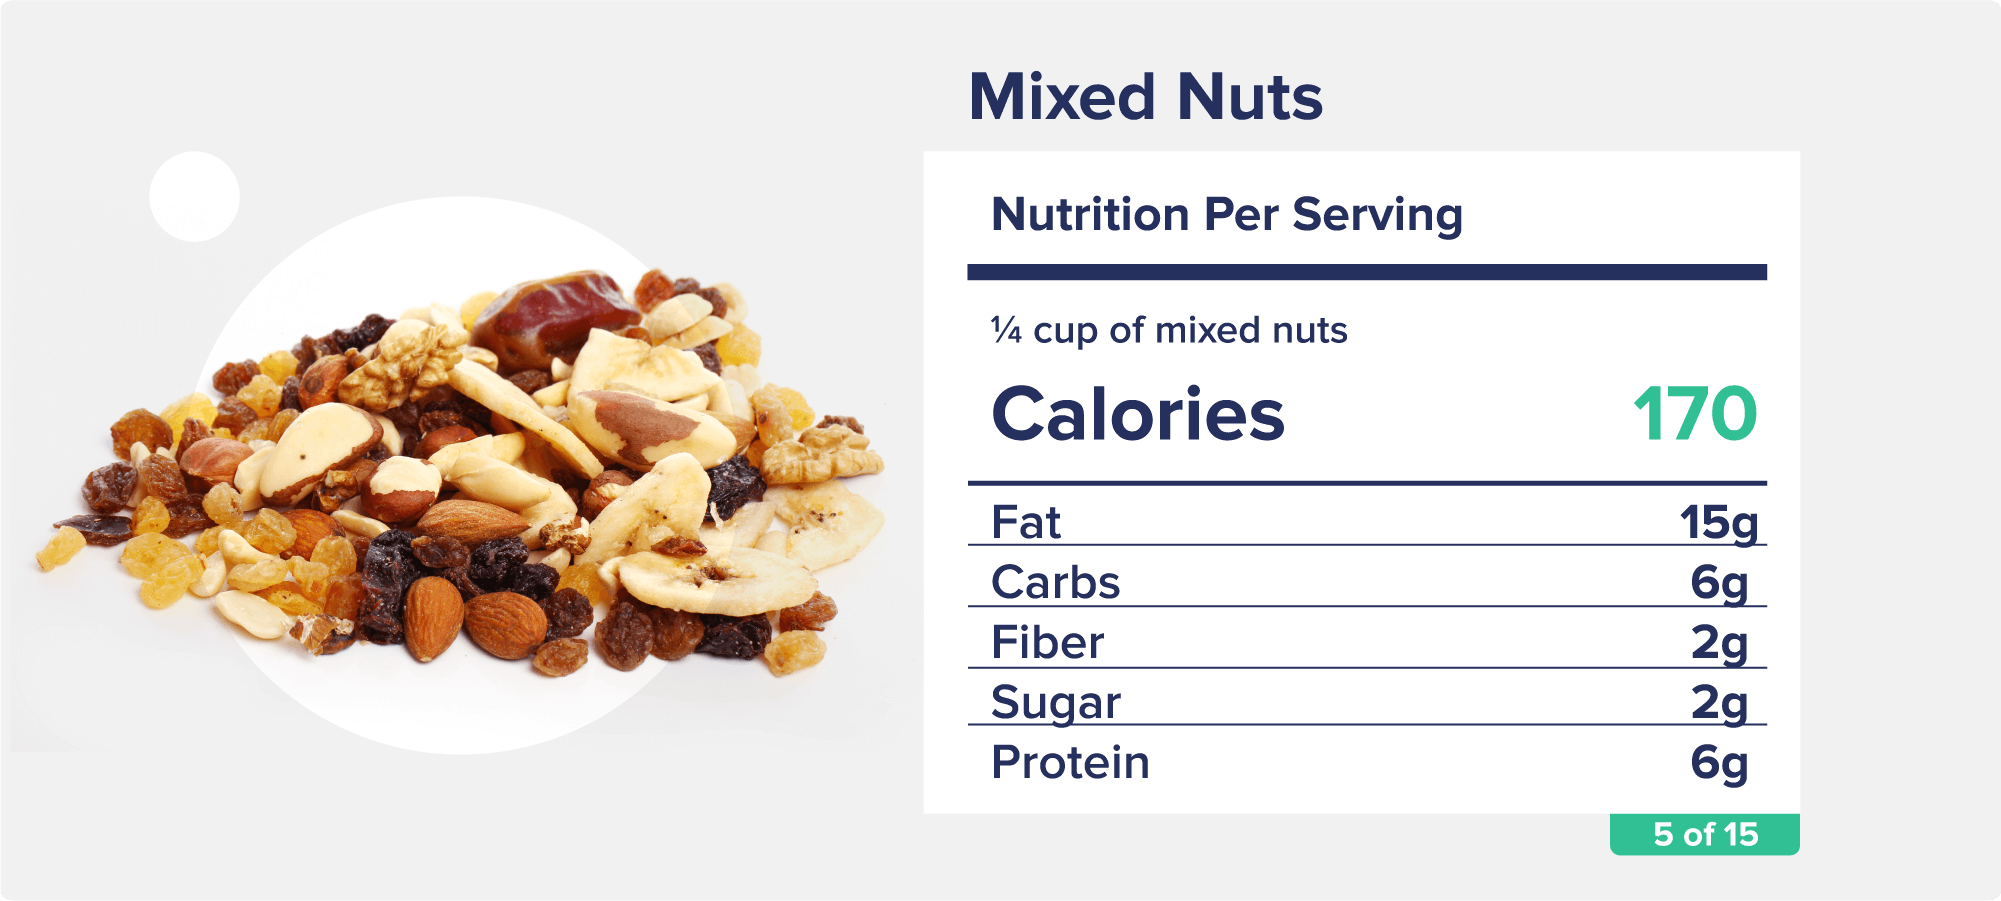 A selection of mixed nuts and raisins with accompanying nutrition facts like calories, fat, and protein.